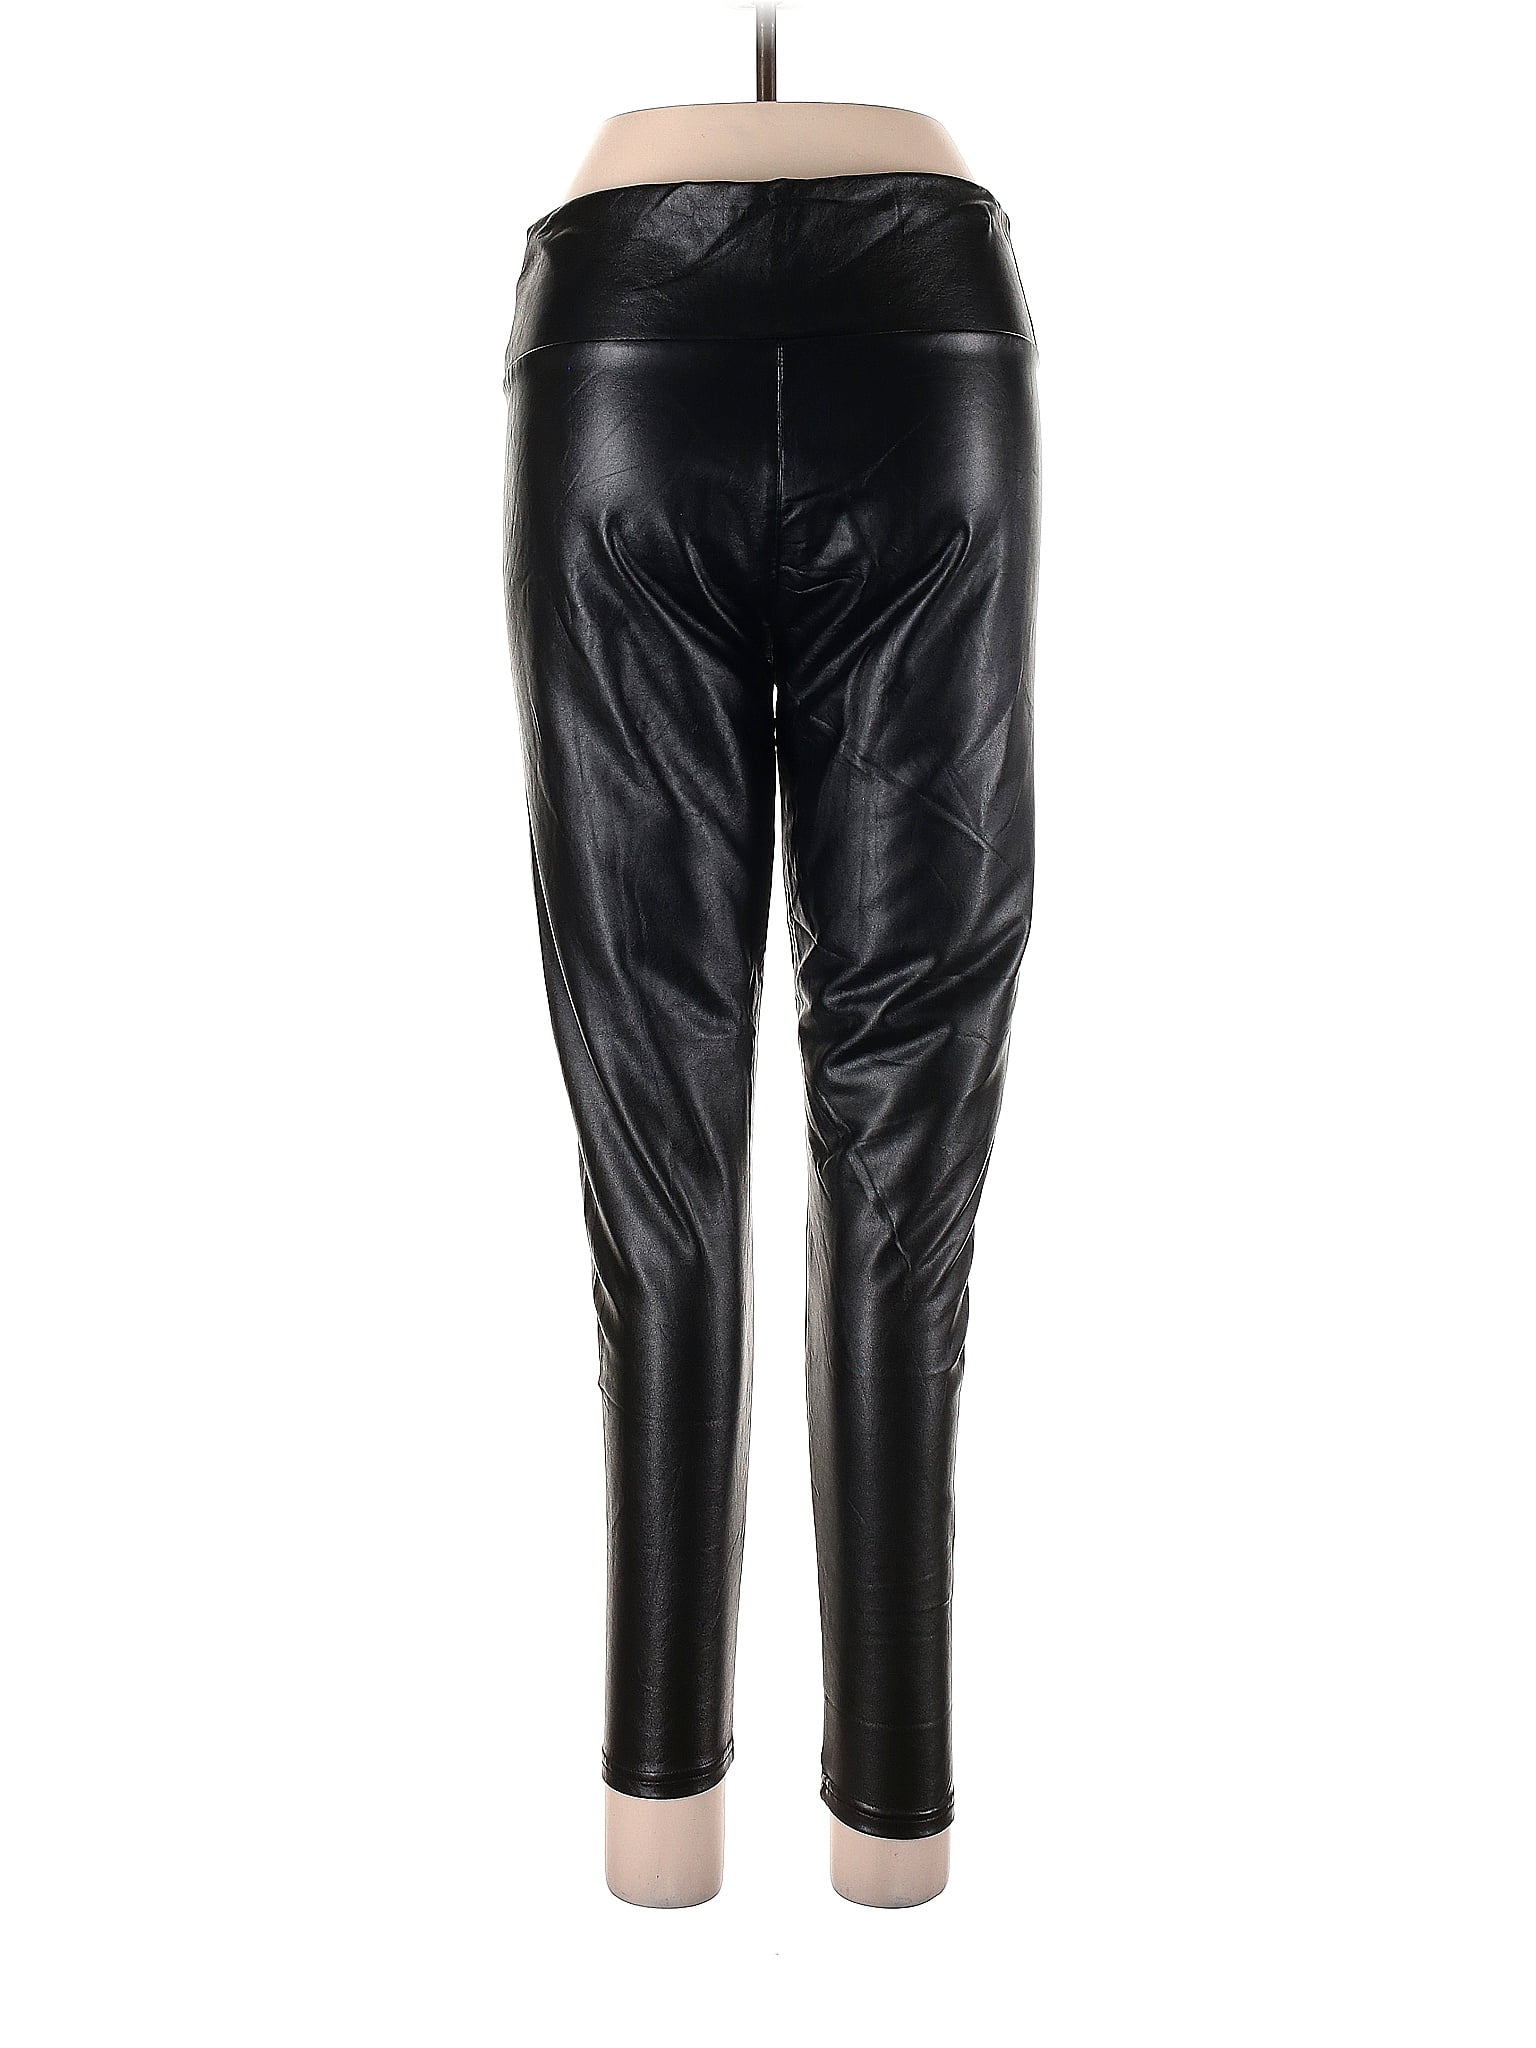 GINASY Black Faux Leather Pants Size L - 62% off